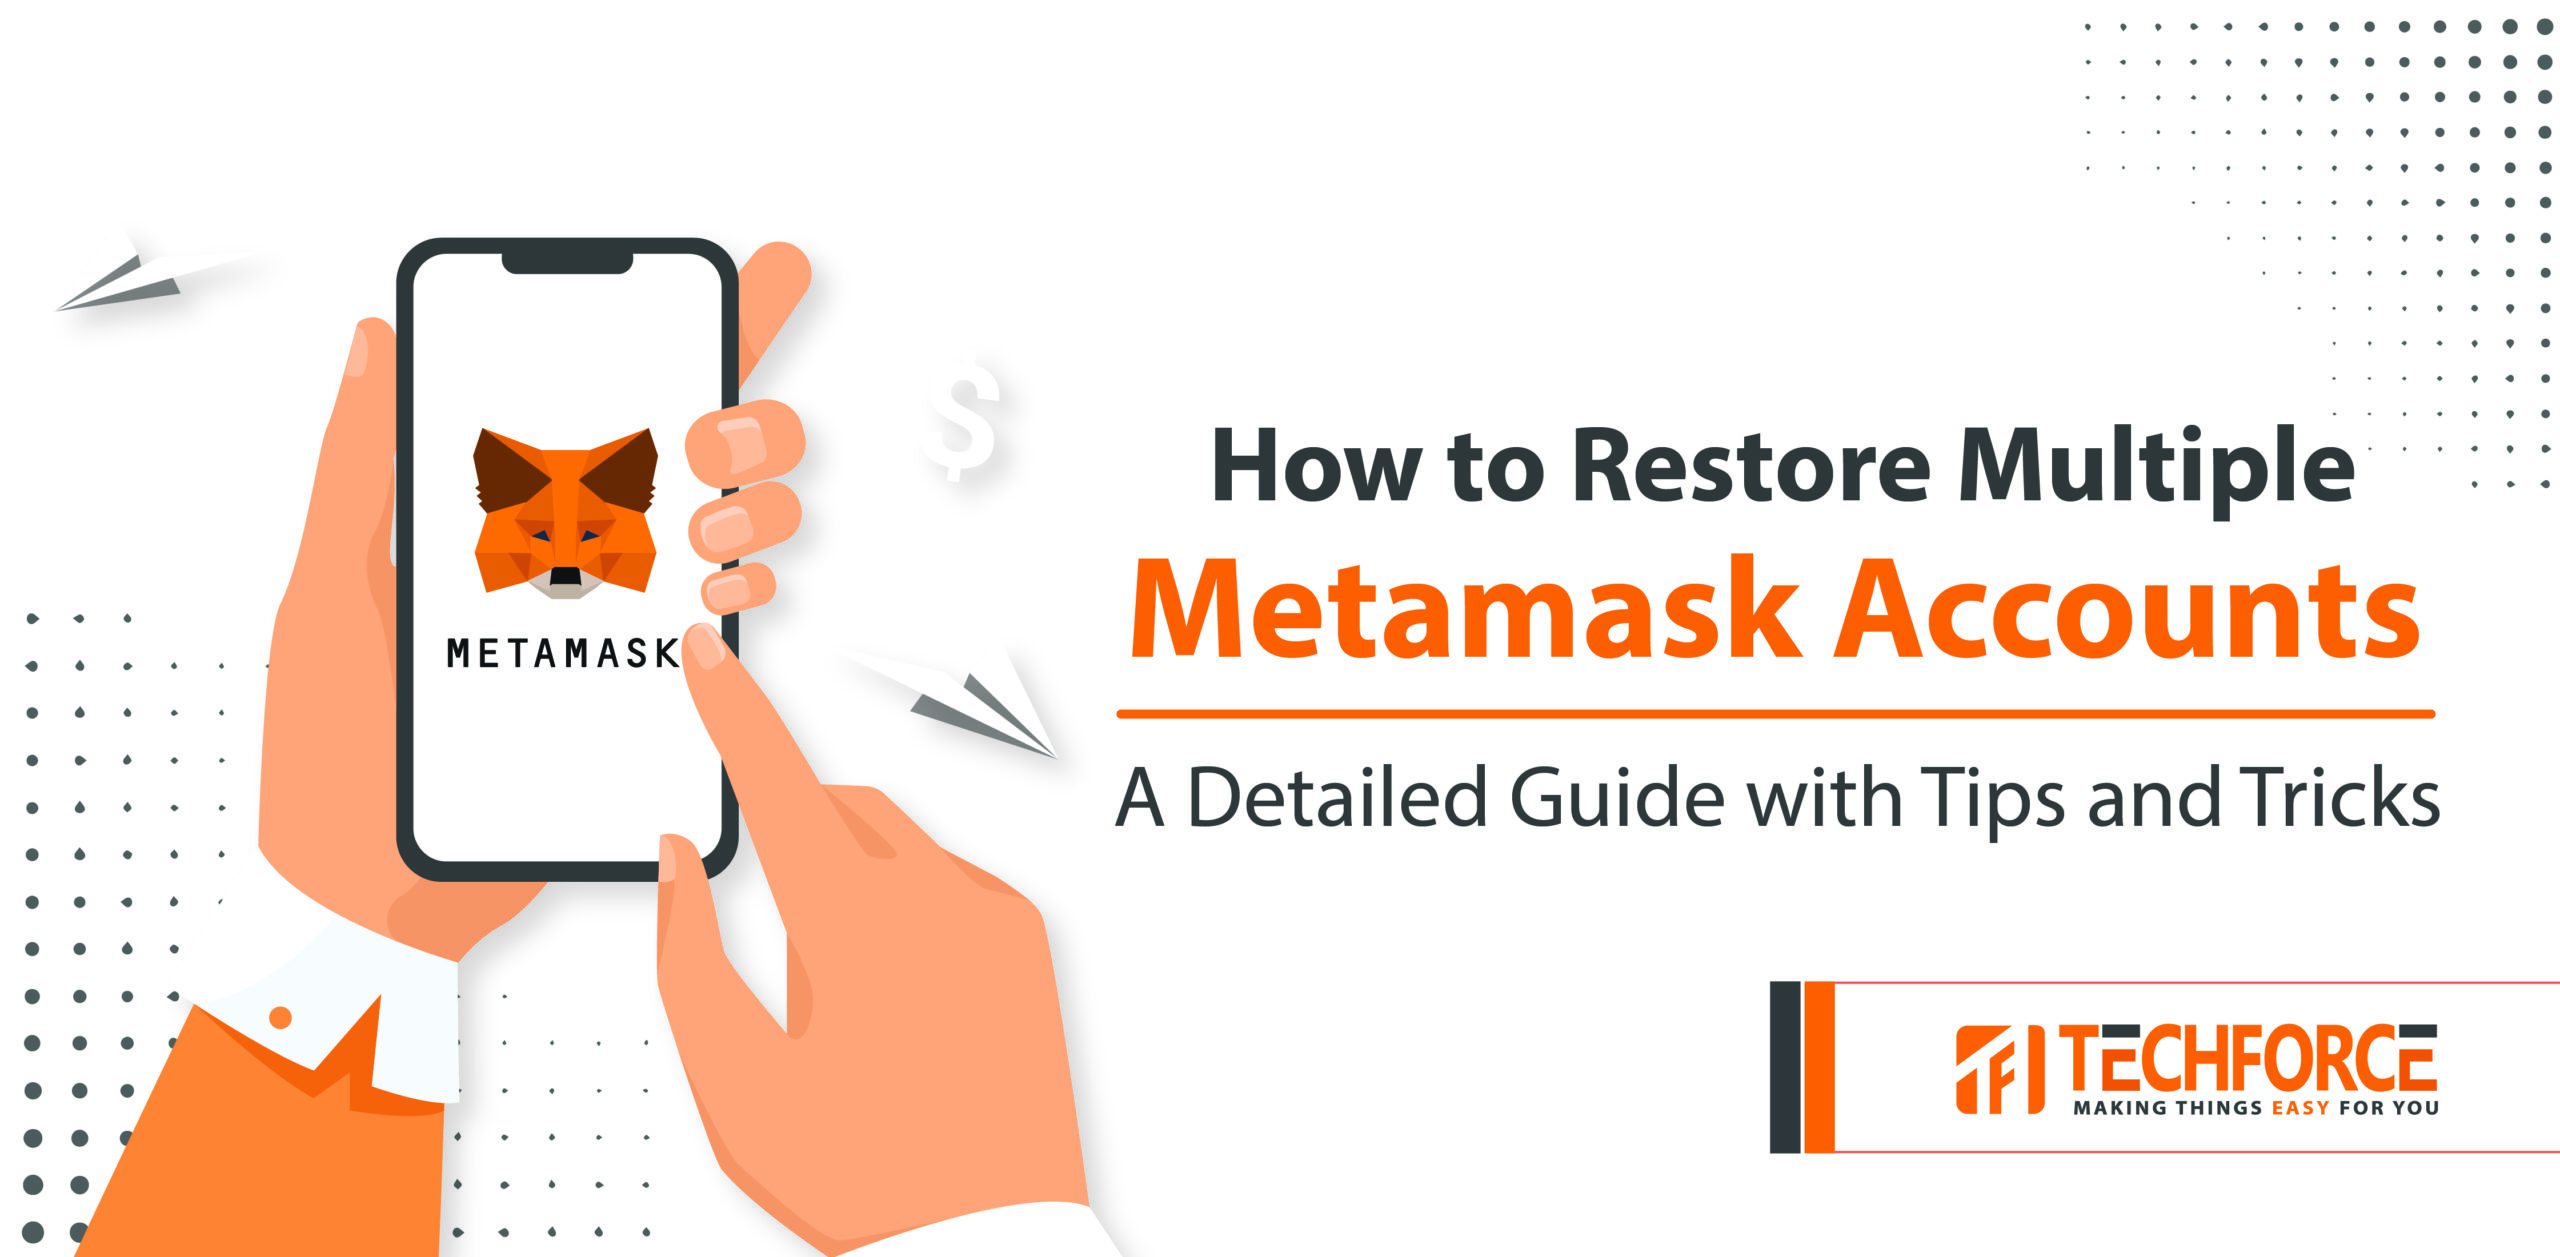 How to Restore multiple MetaMask Accounts: A Detailed Guide with Tips and Tricks